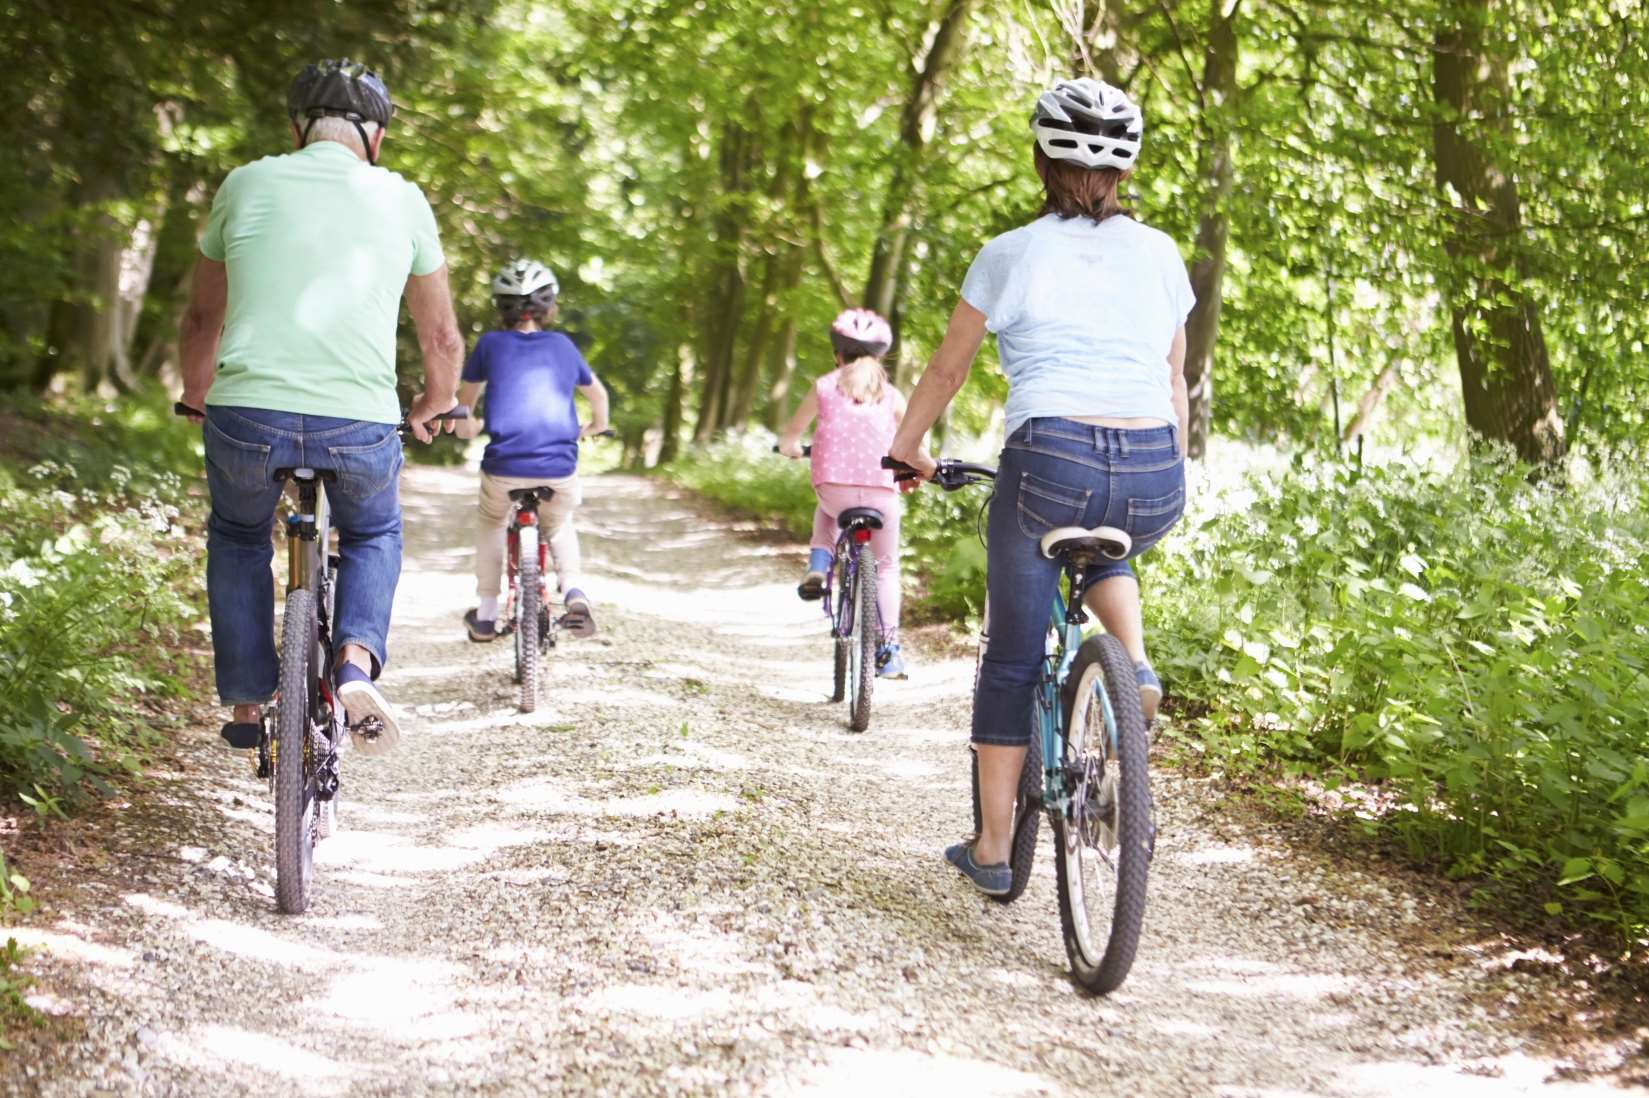 Bedgebury Forest is the perfect place for a family bike ride